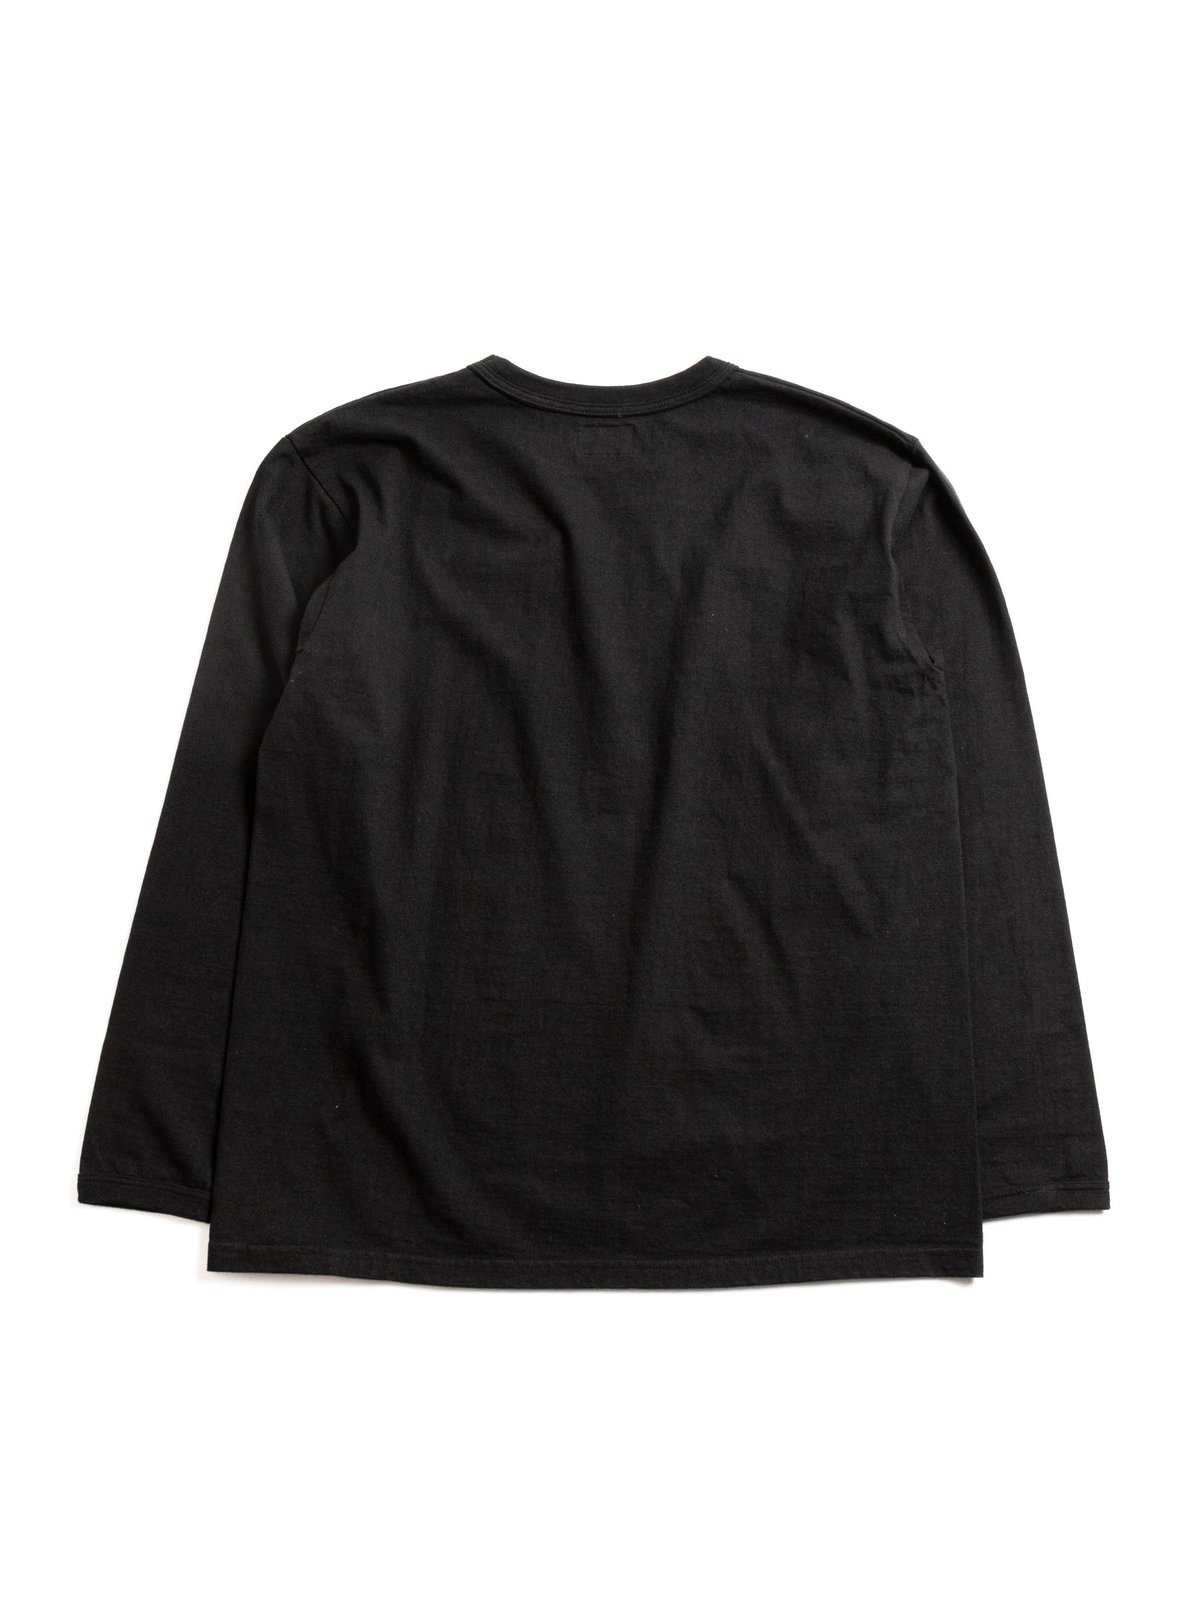 MAKAHA L/S T SHIRT ANTHRACITE - Image 4